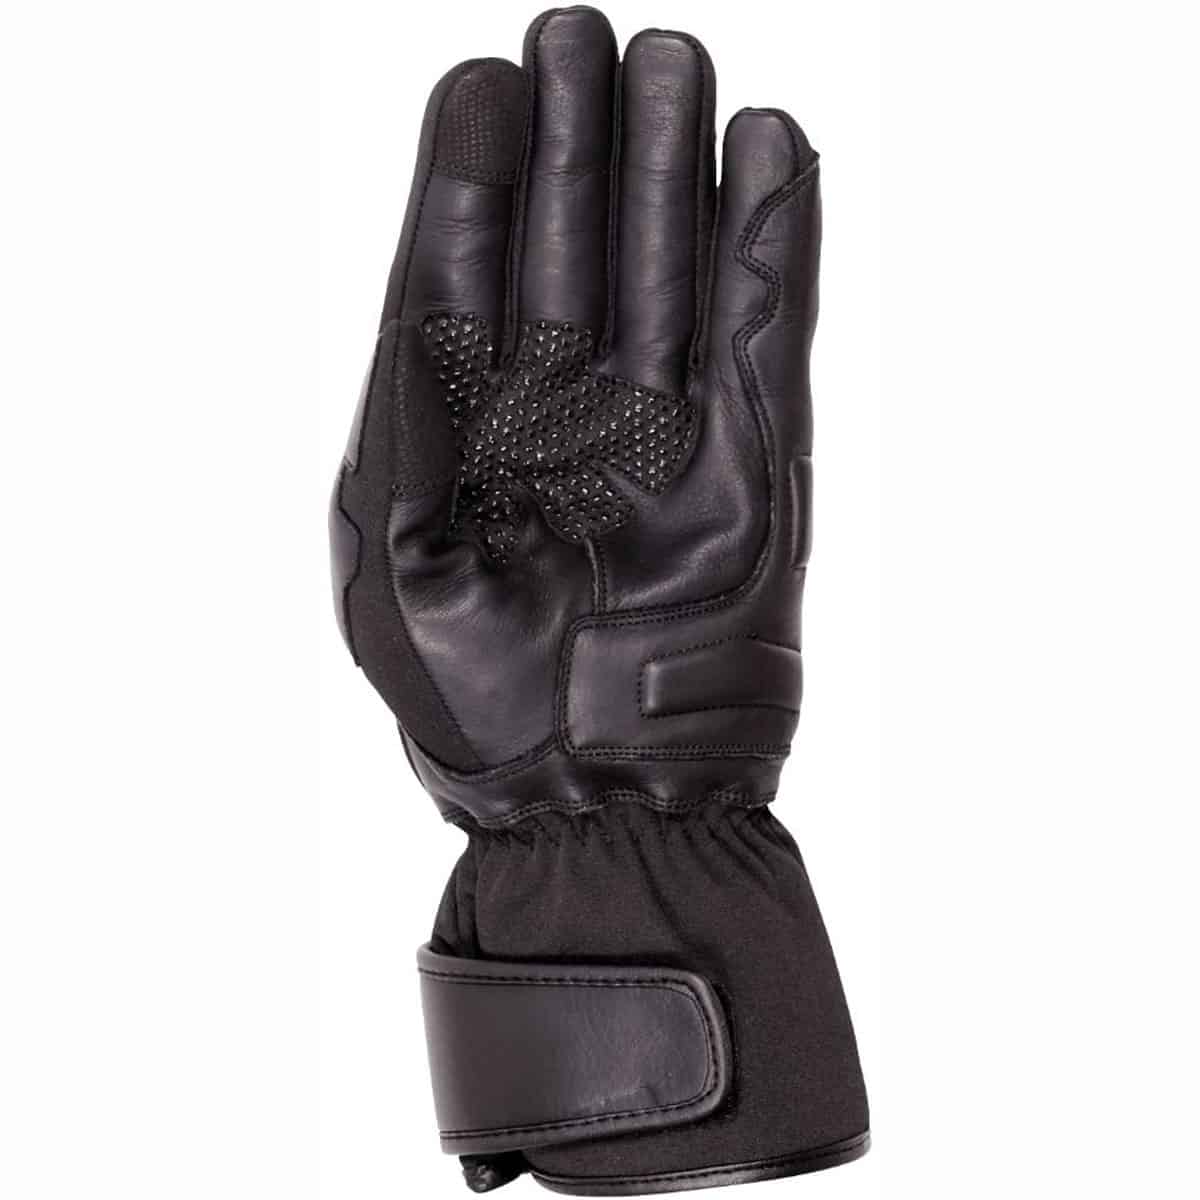 The Weise Fjord WP Gloves are perfect for cruising on your motorcycle while keeping your hands warm and comfortable. 